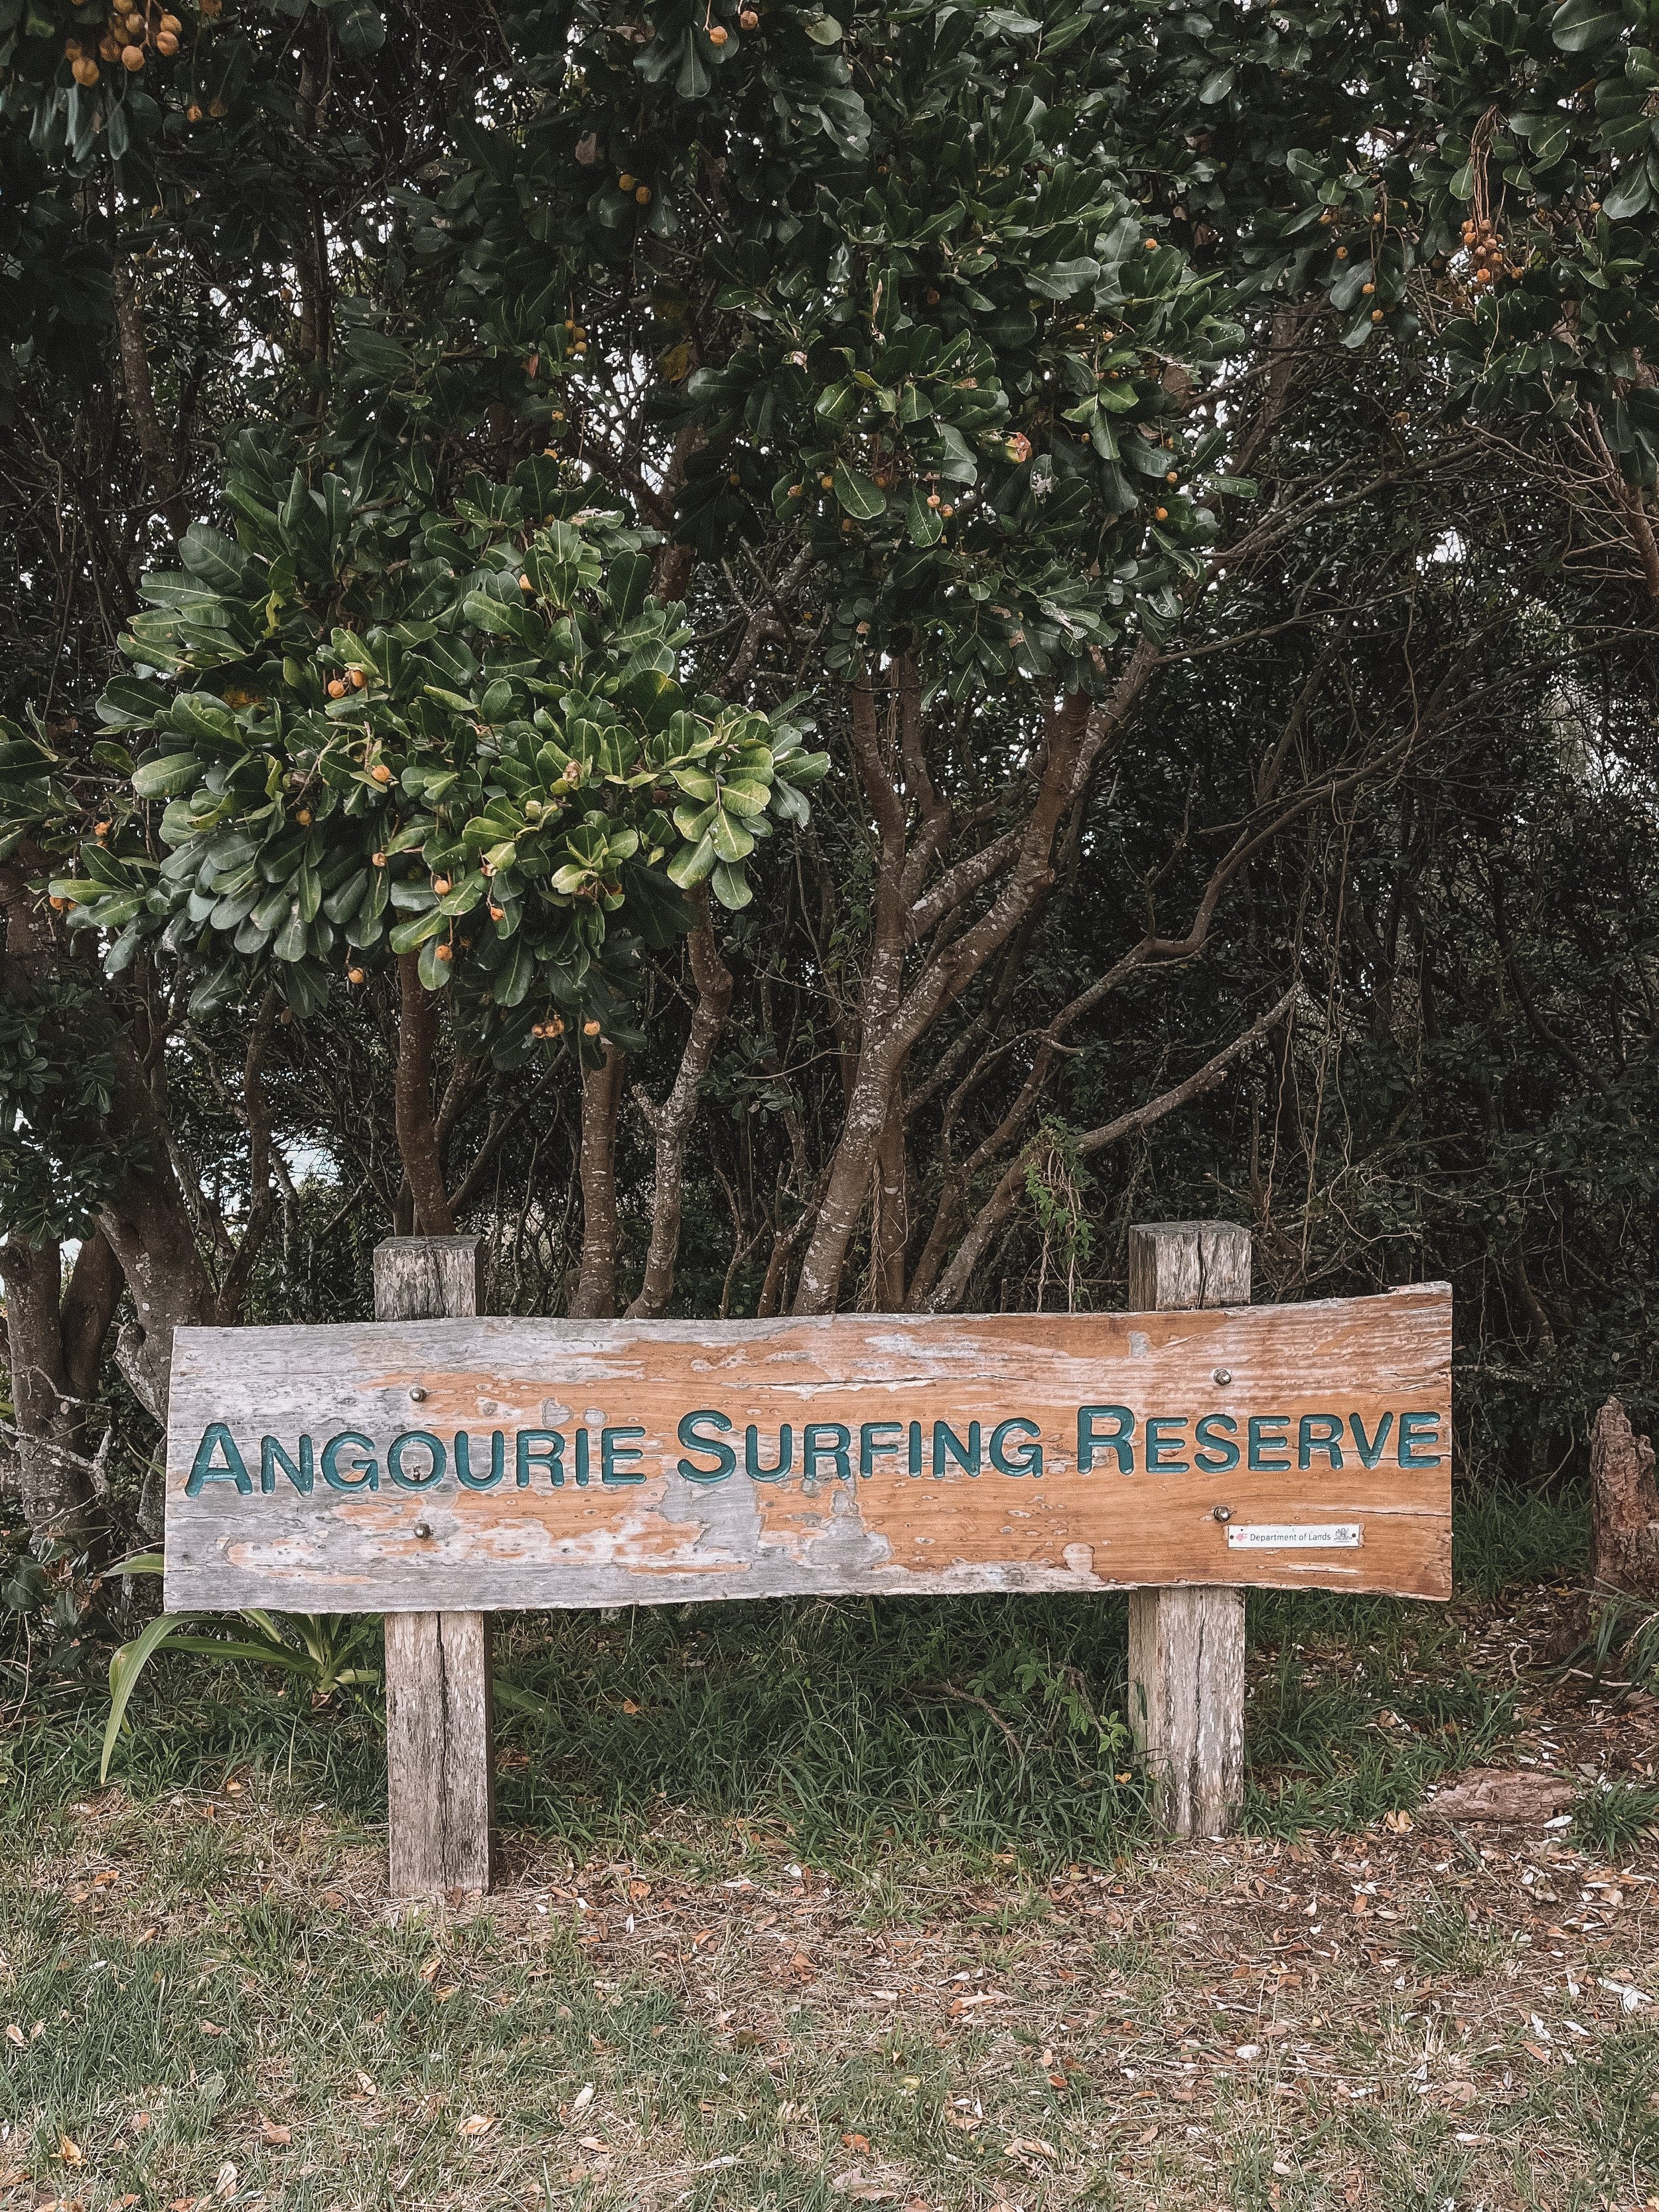 Angourie Surfing Reserve Sign - Yamba - New South Wales (NSW) - Australia